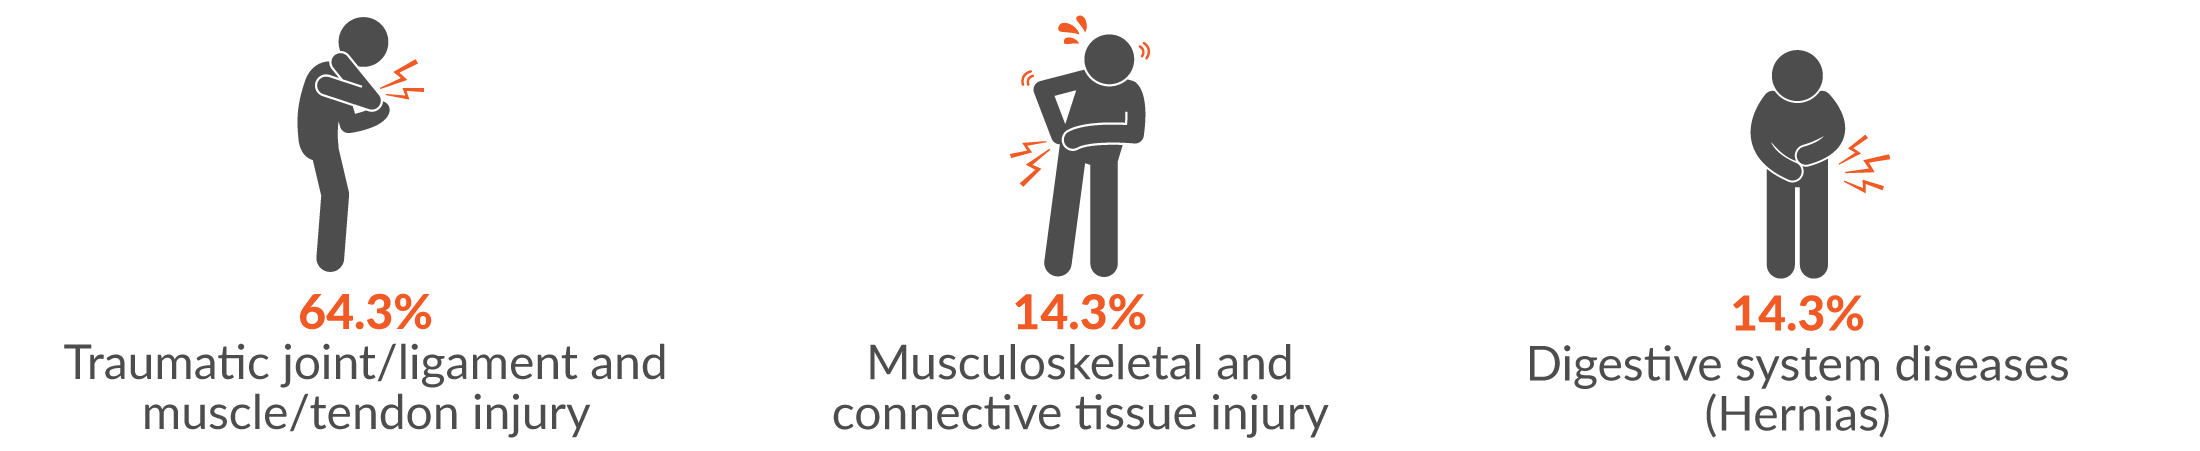 This infographic shows the main three injury groups resulting from body stressing were 64.3% traumatic joint/ligament and muscle/tendon injury; 14.3% musculoskeletal and connective tissue injury; and digestive system diseases (hernias) (also 14.3%).